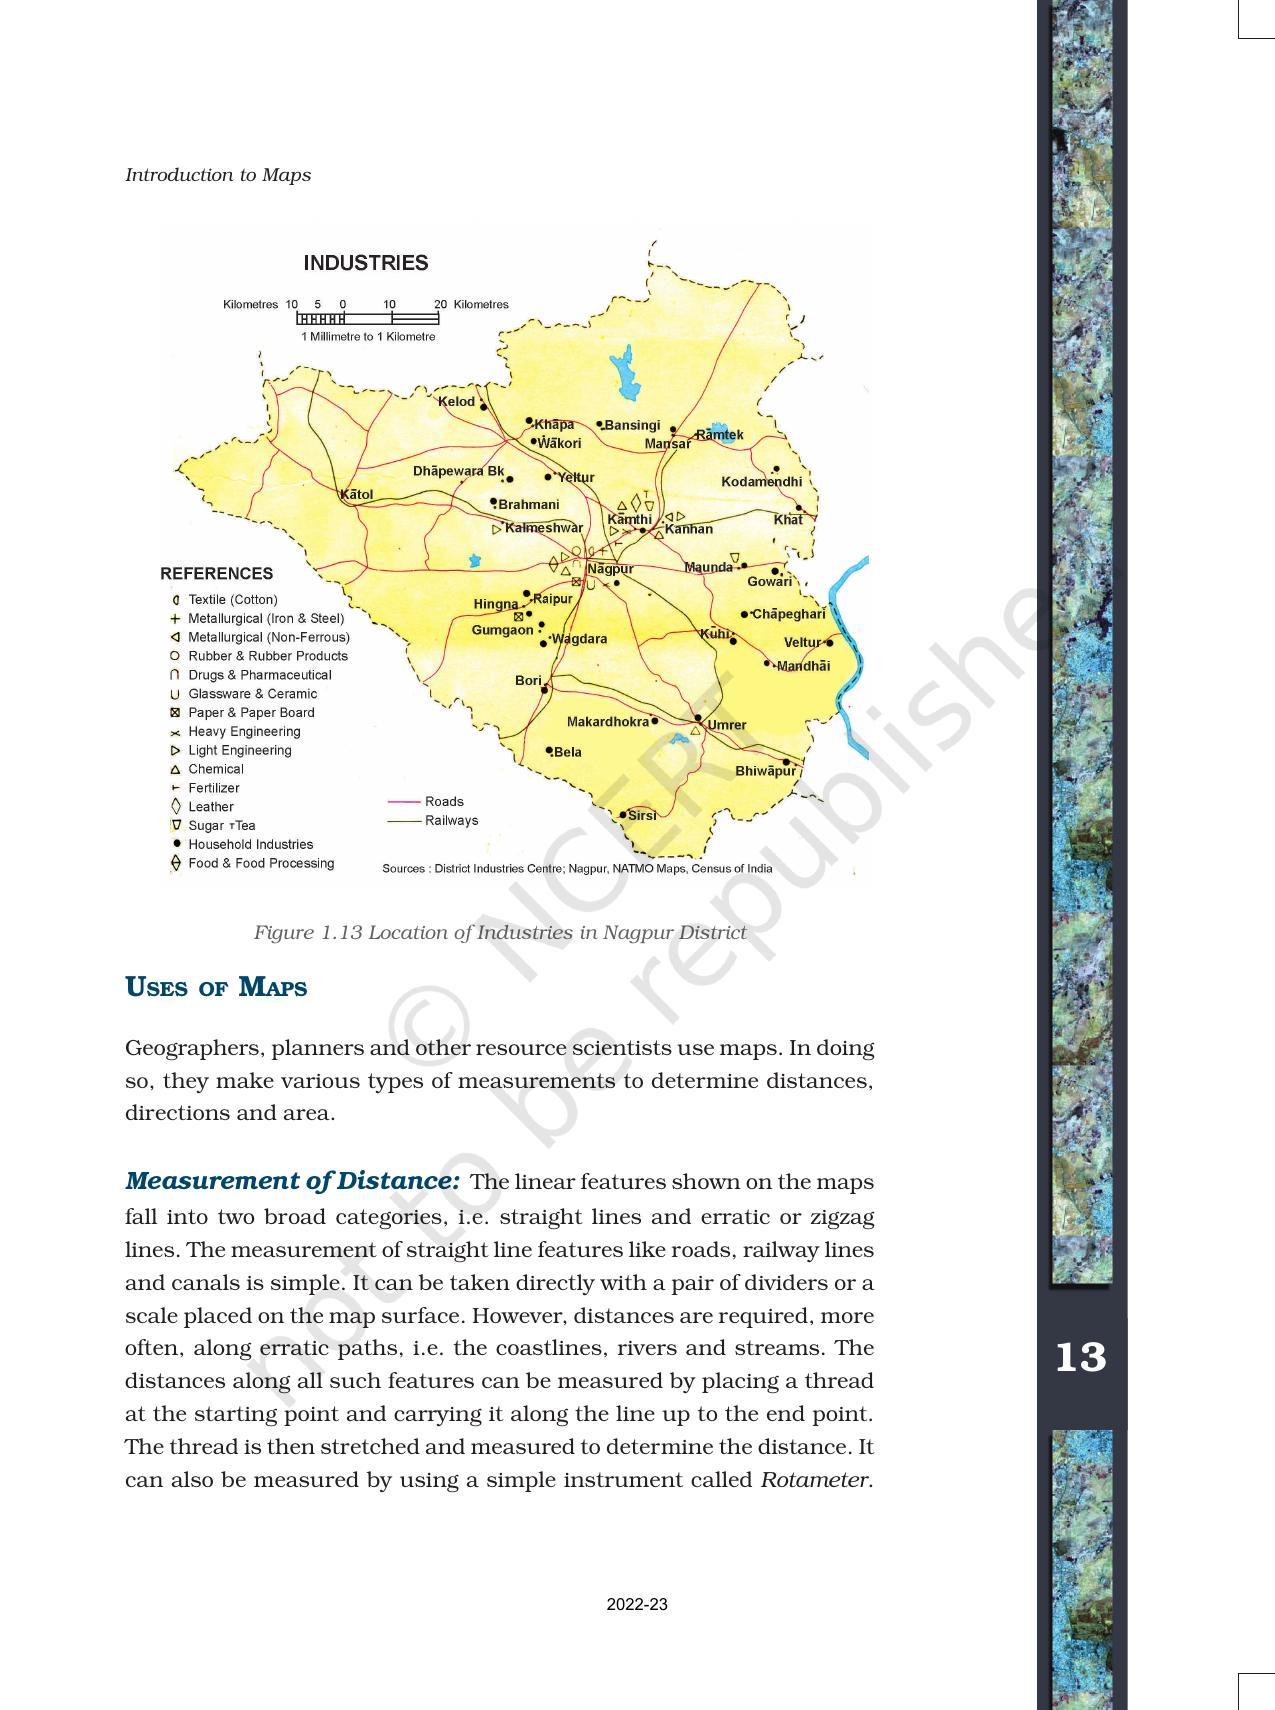 NCERT Book for Class 11 Geography (Part-III) Chapter 1 Introduction to Maps - Page 13